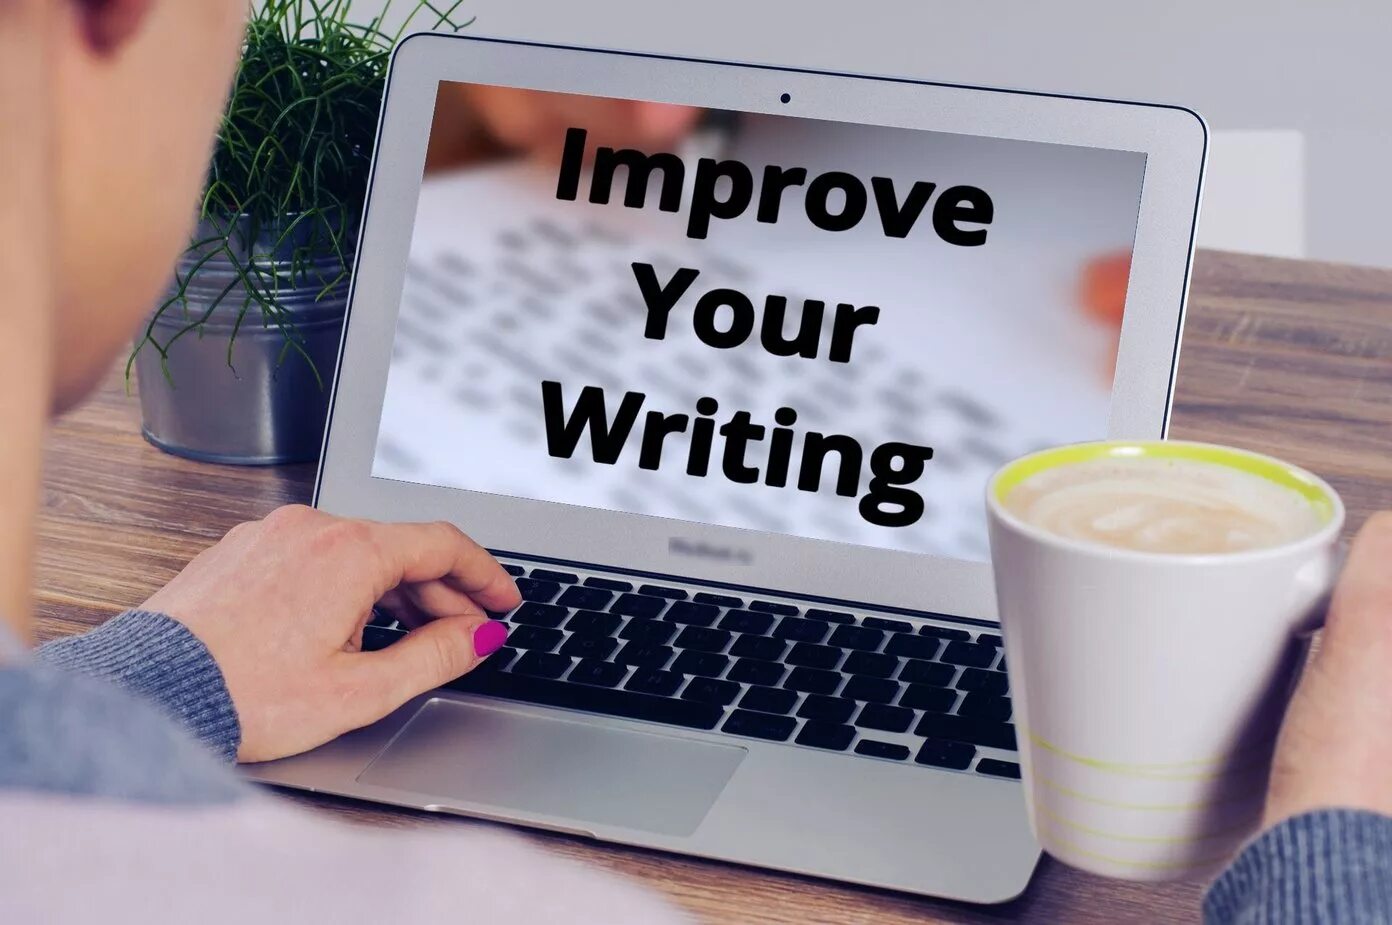 Is the best in writing. Improving writing skills. Improve your writing skills. Improve writing skills. Improvement writing skills.